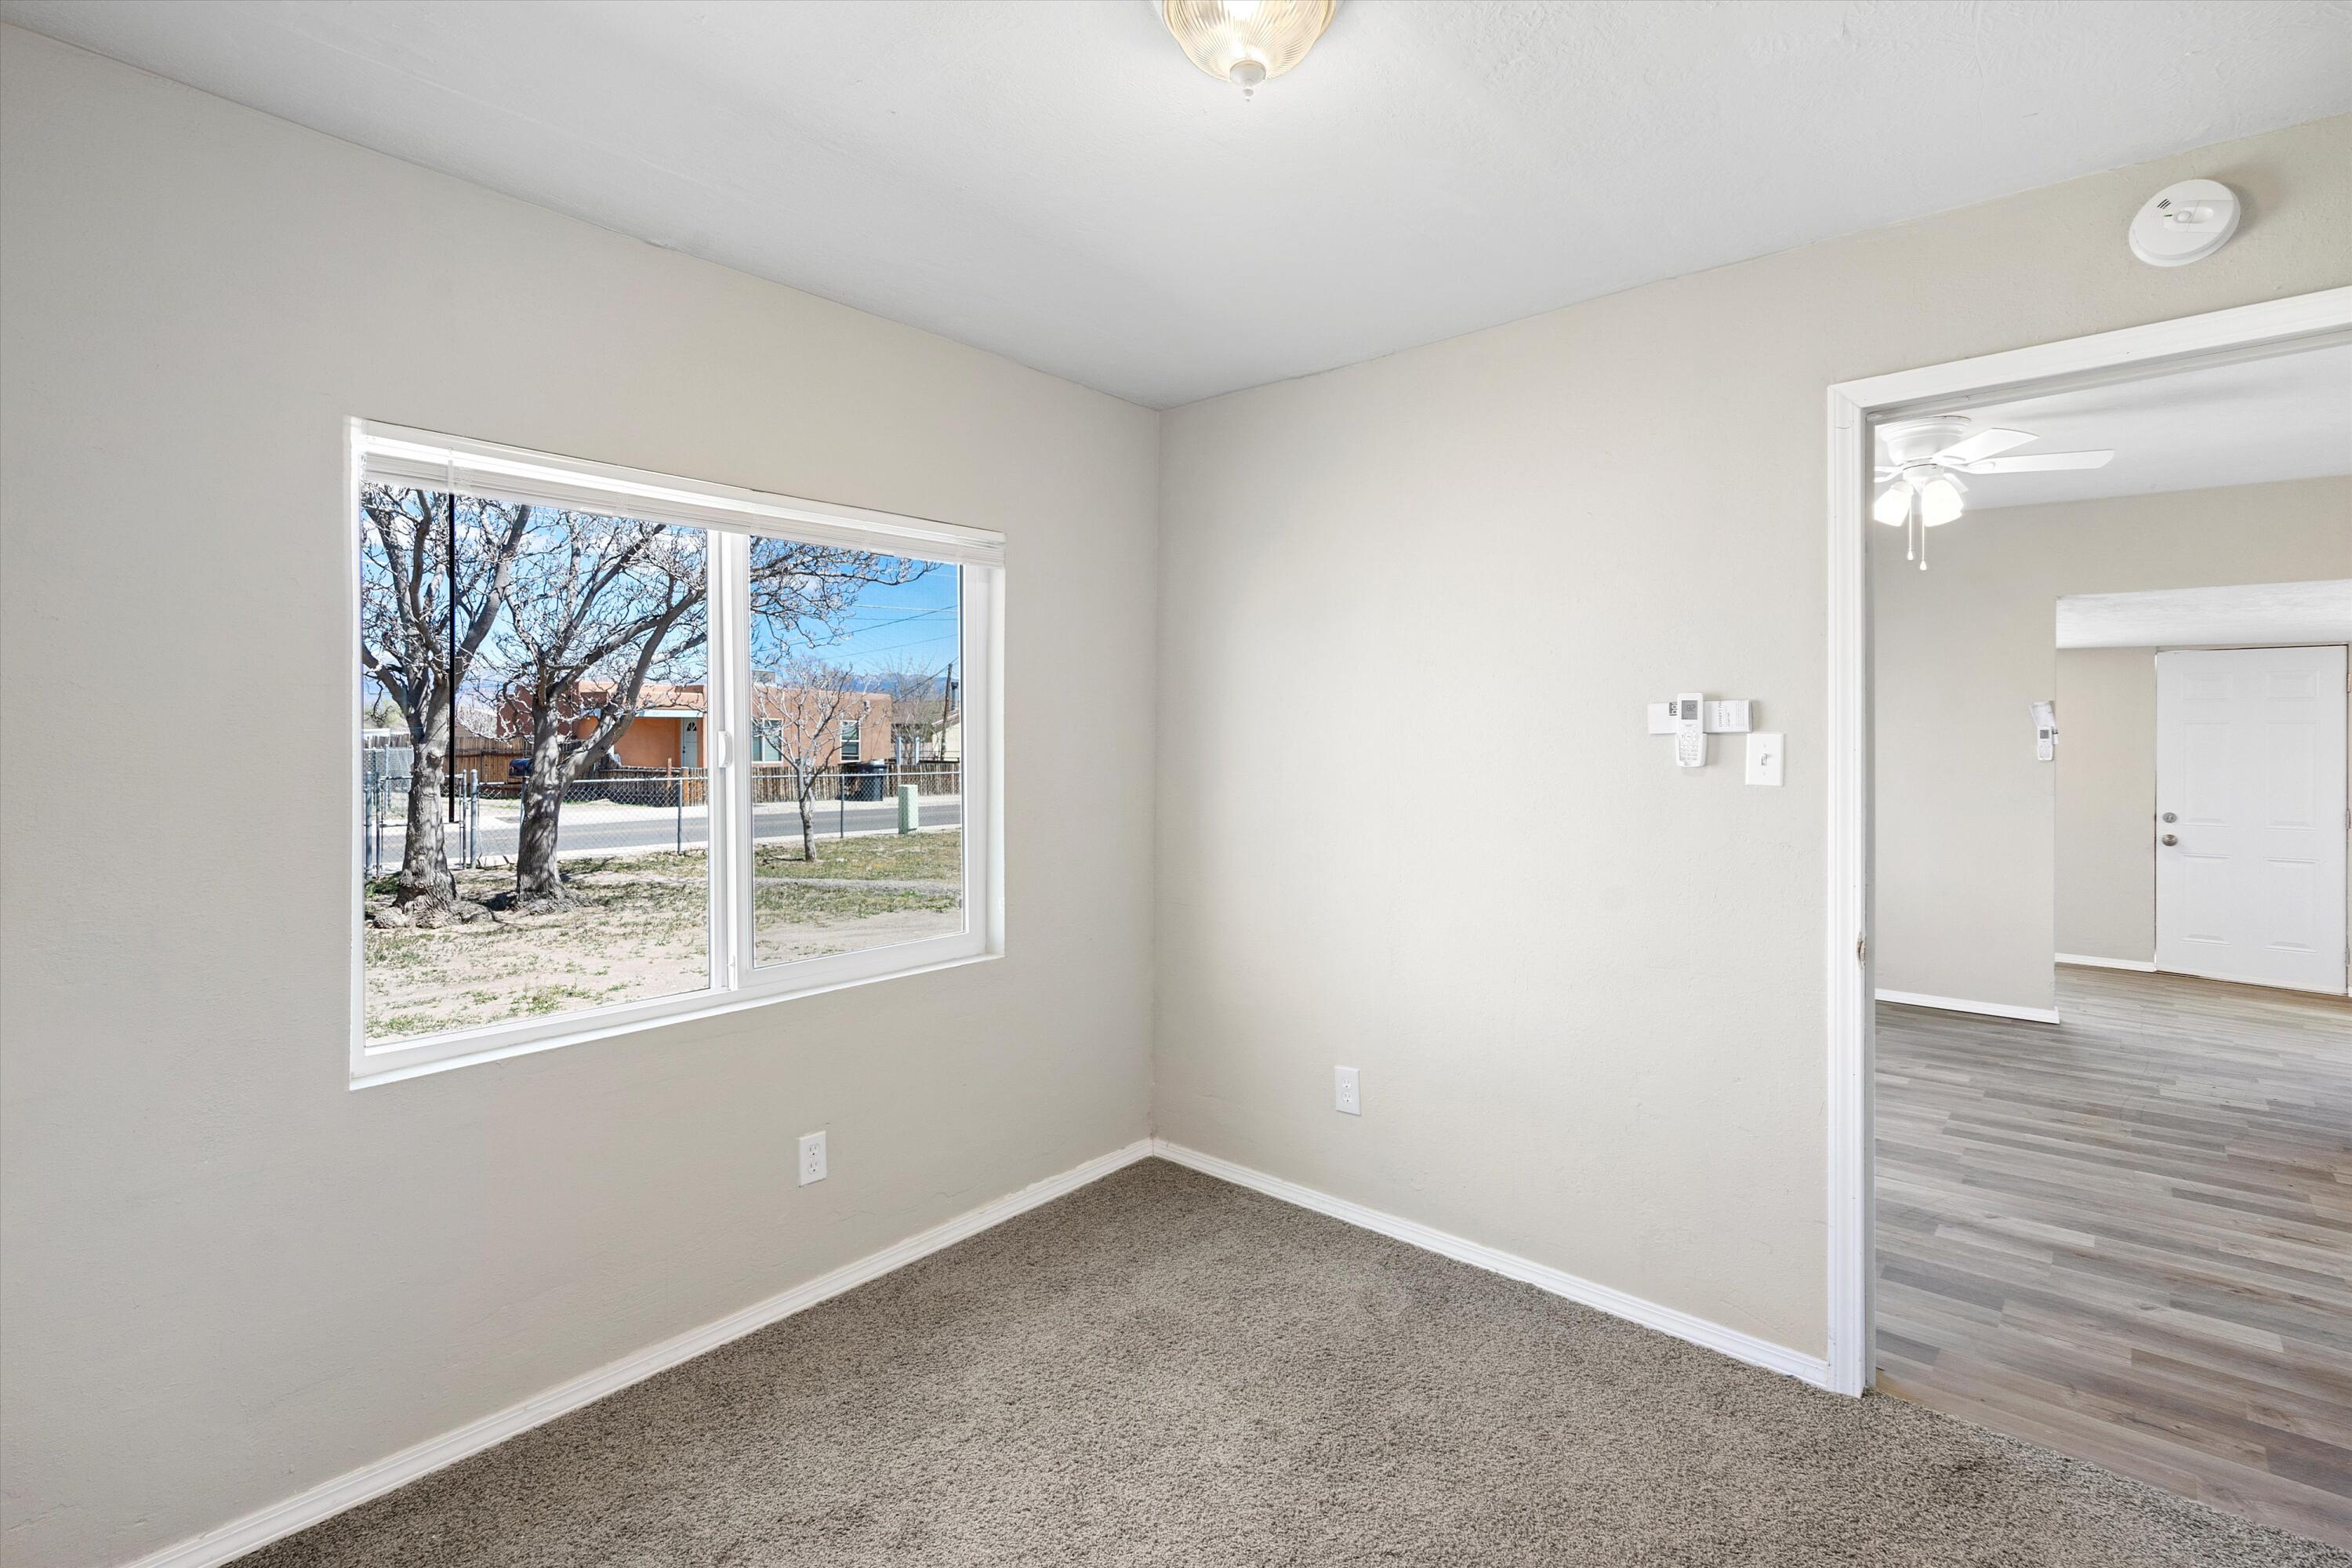 1580 Five Points Road SW, Albuquerque, New Mexico 87105, 3 Bedrooms Bedrooms, ,1 BathroomBathrooms,Residential,For Sale,1580 Five Points Road SW,1059629